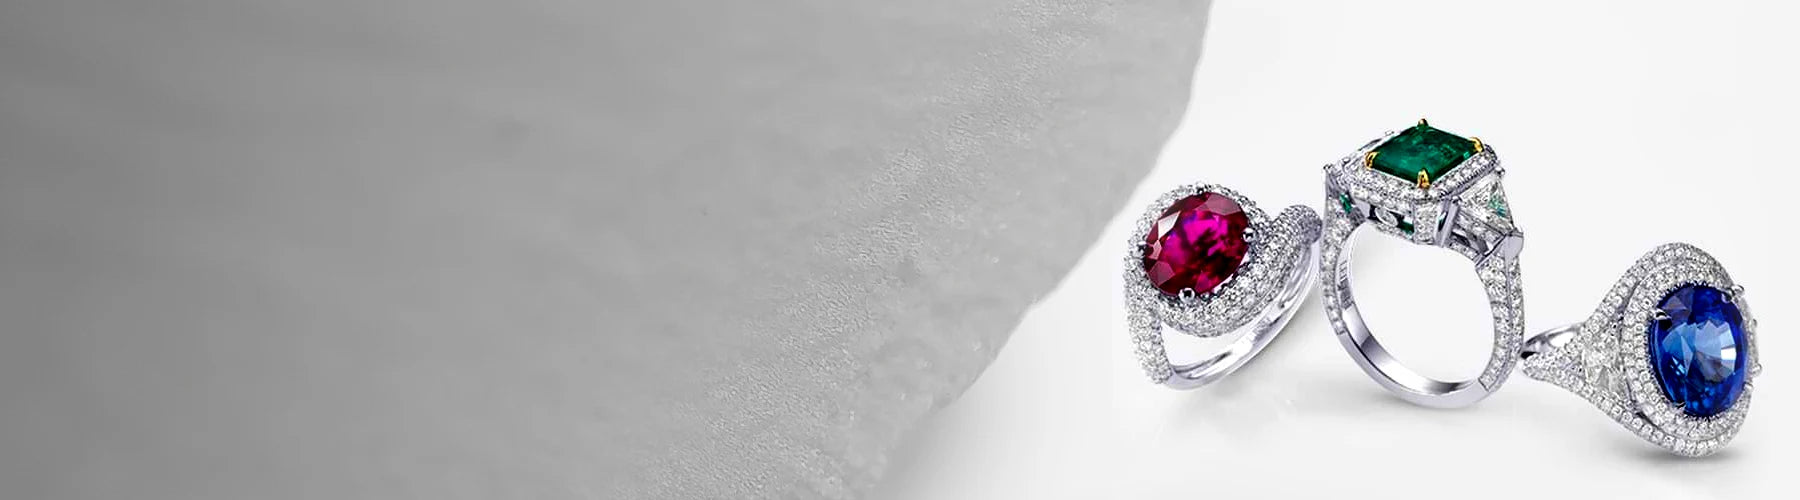 customize your own personal gemstone engagement ring for less at Quorri